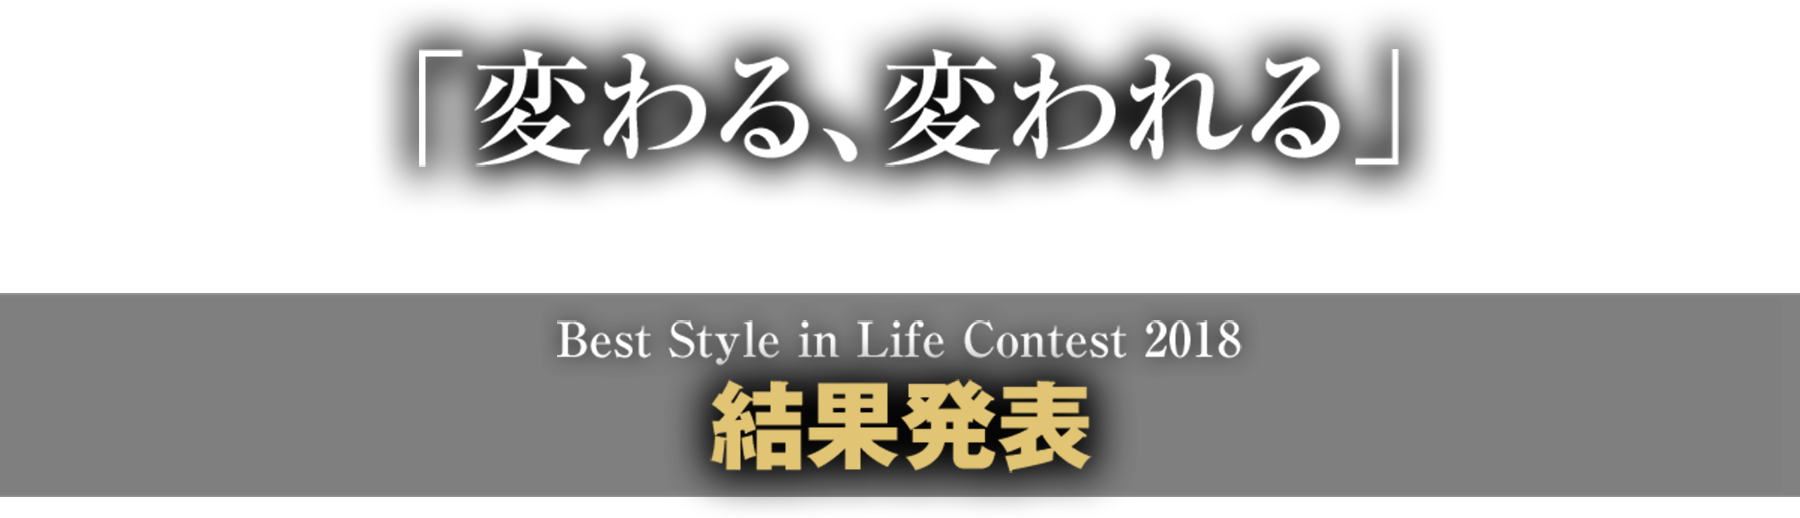 Best Style in Life Contest 2018 結果発表